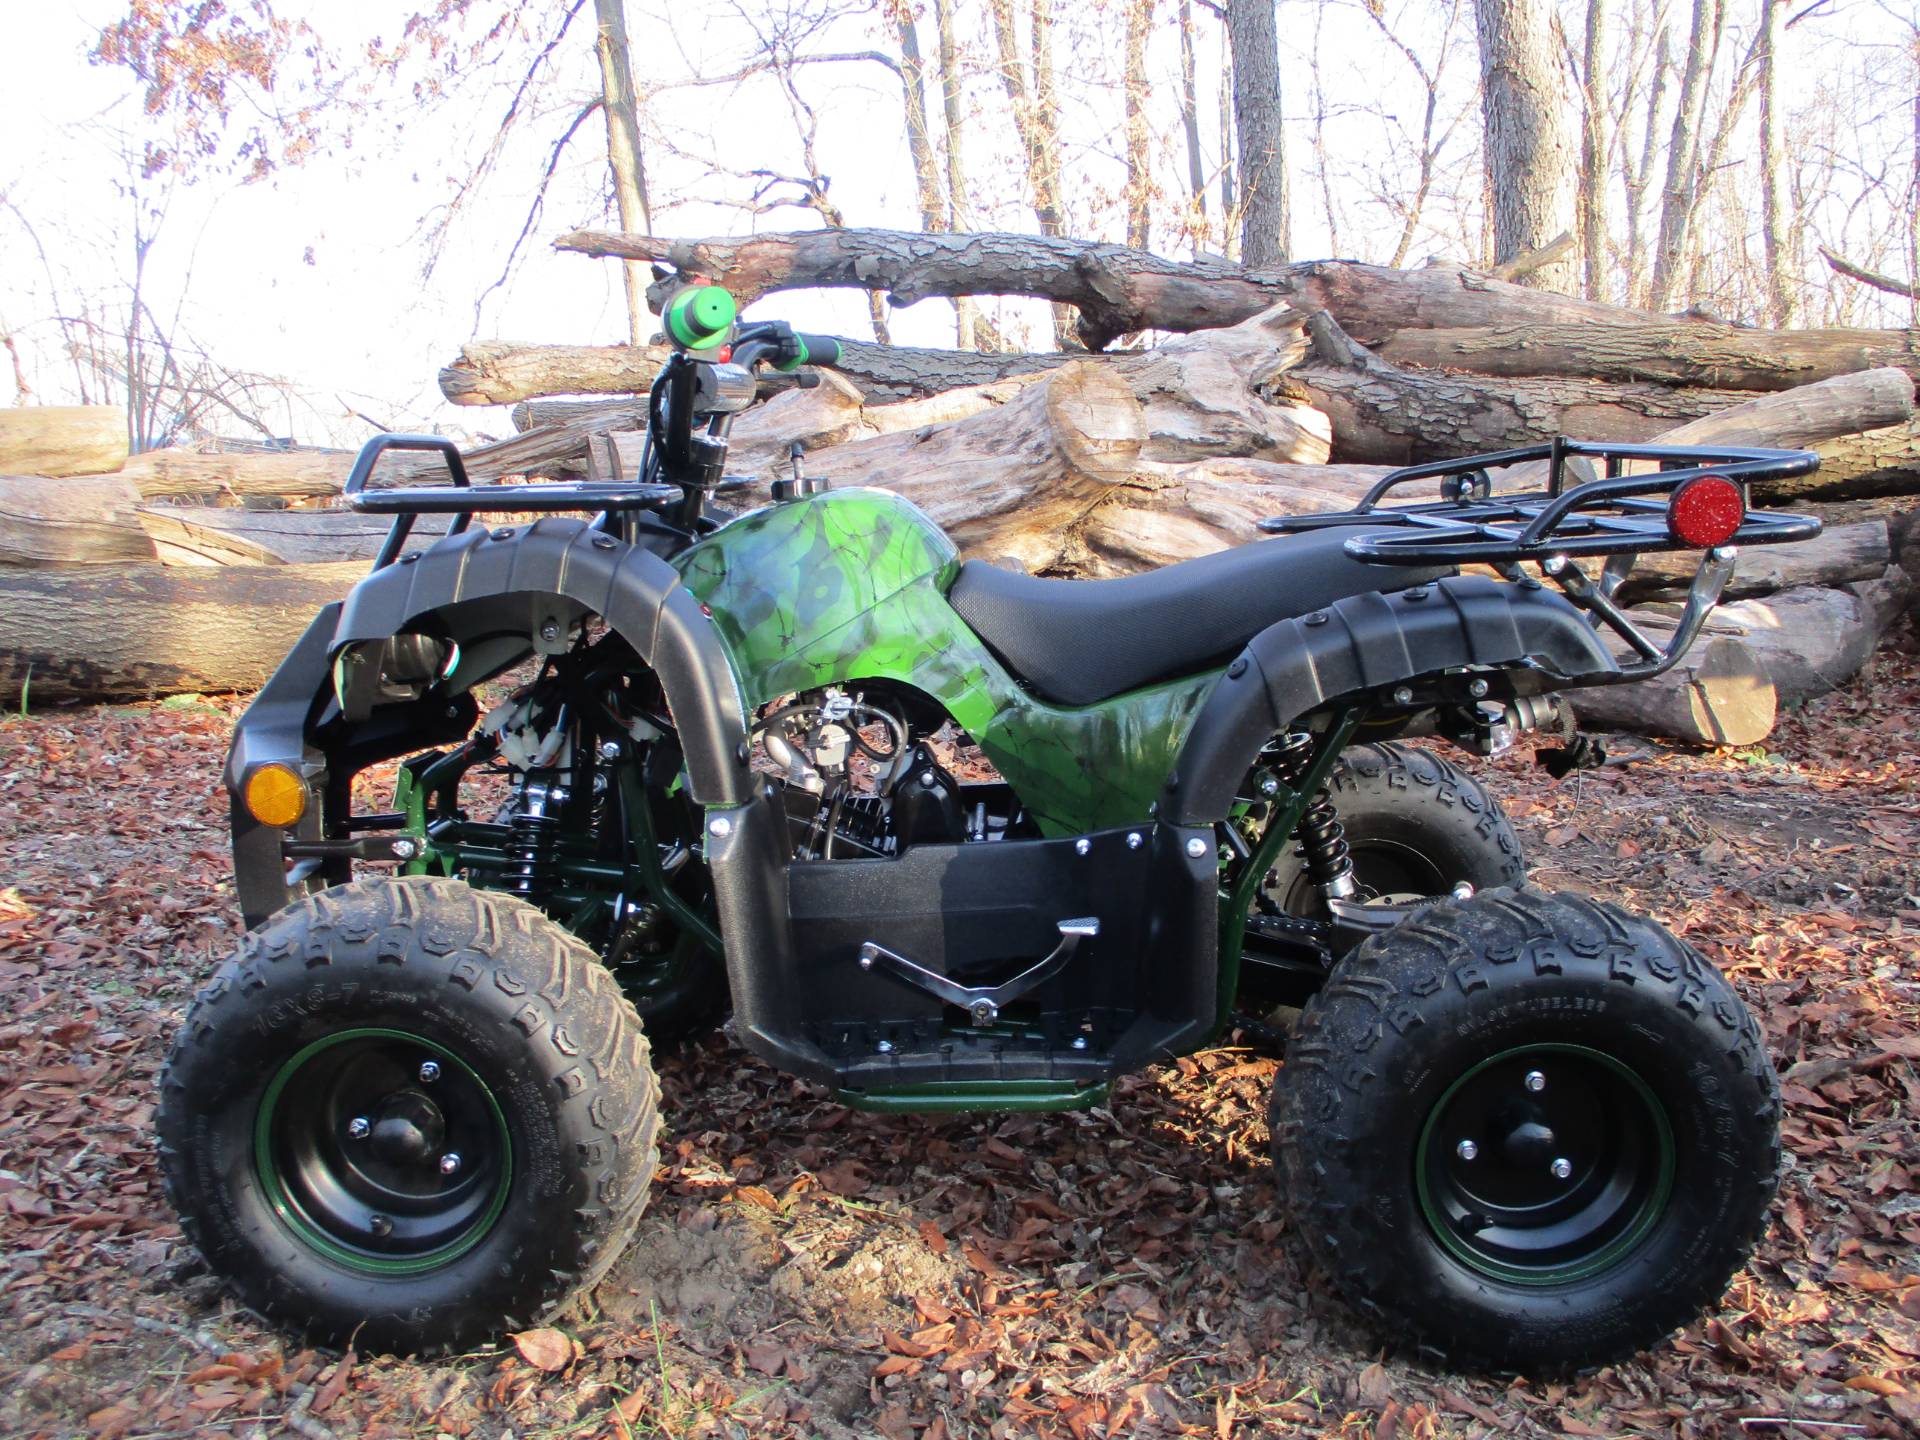 2020 Icebear PAH125-8S 125cc Youth/Kids Quad ATV Automatic with Reverse in Howell, Michigan - Photo 1